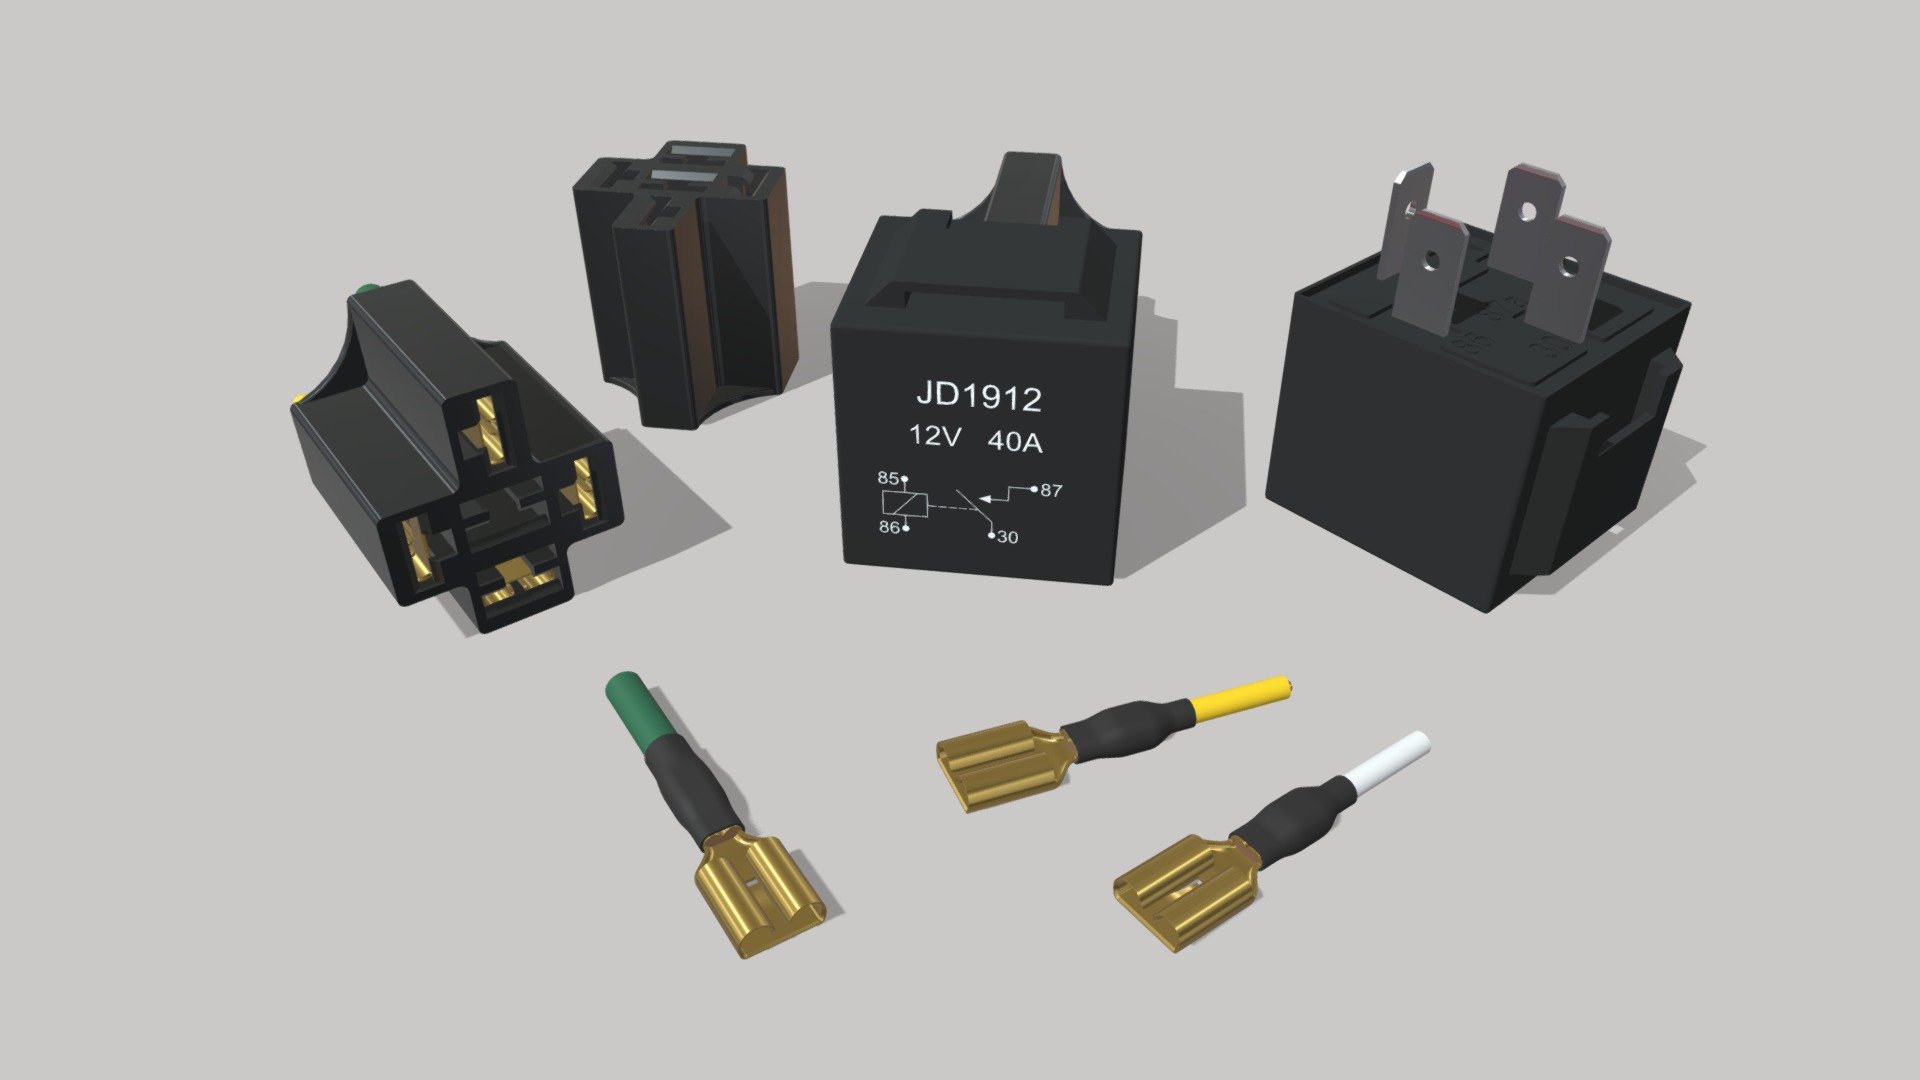 This set of models includes a JD1912 12V 40A power relay and a standard connector with terminals for this relay. The models are designed in a CAD system for their use as part of the assembly of the designed devices. Using this model in the layout helps to save design time. This model of power relay is quite common both in autoelectrics and in other fields of technology 3d model